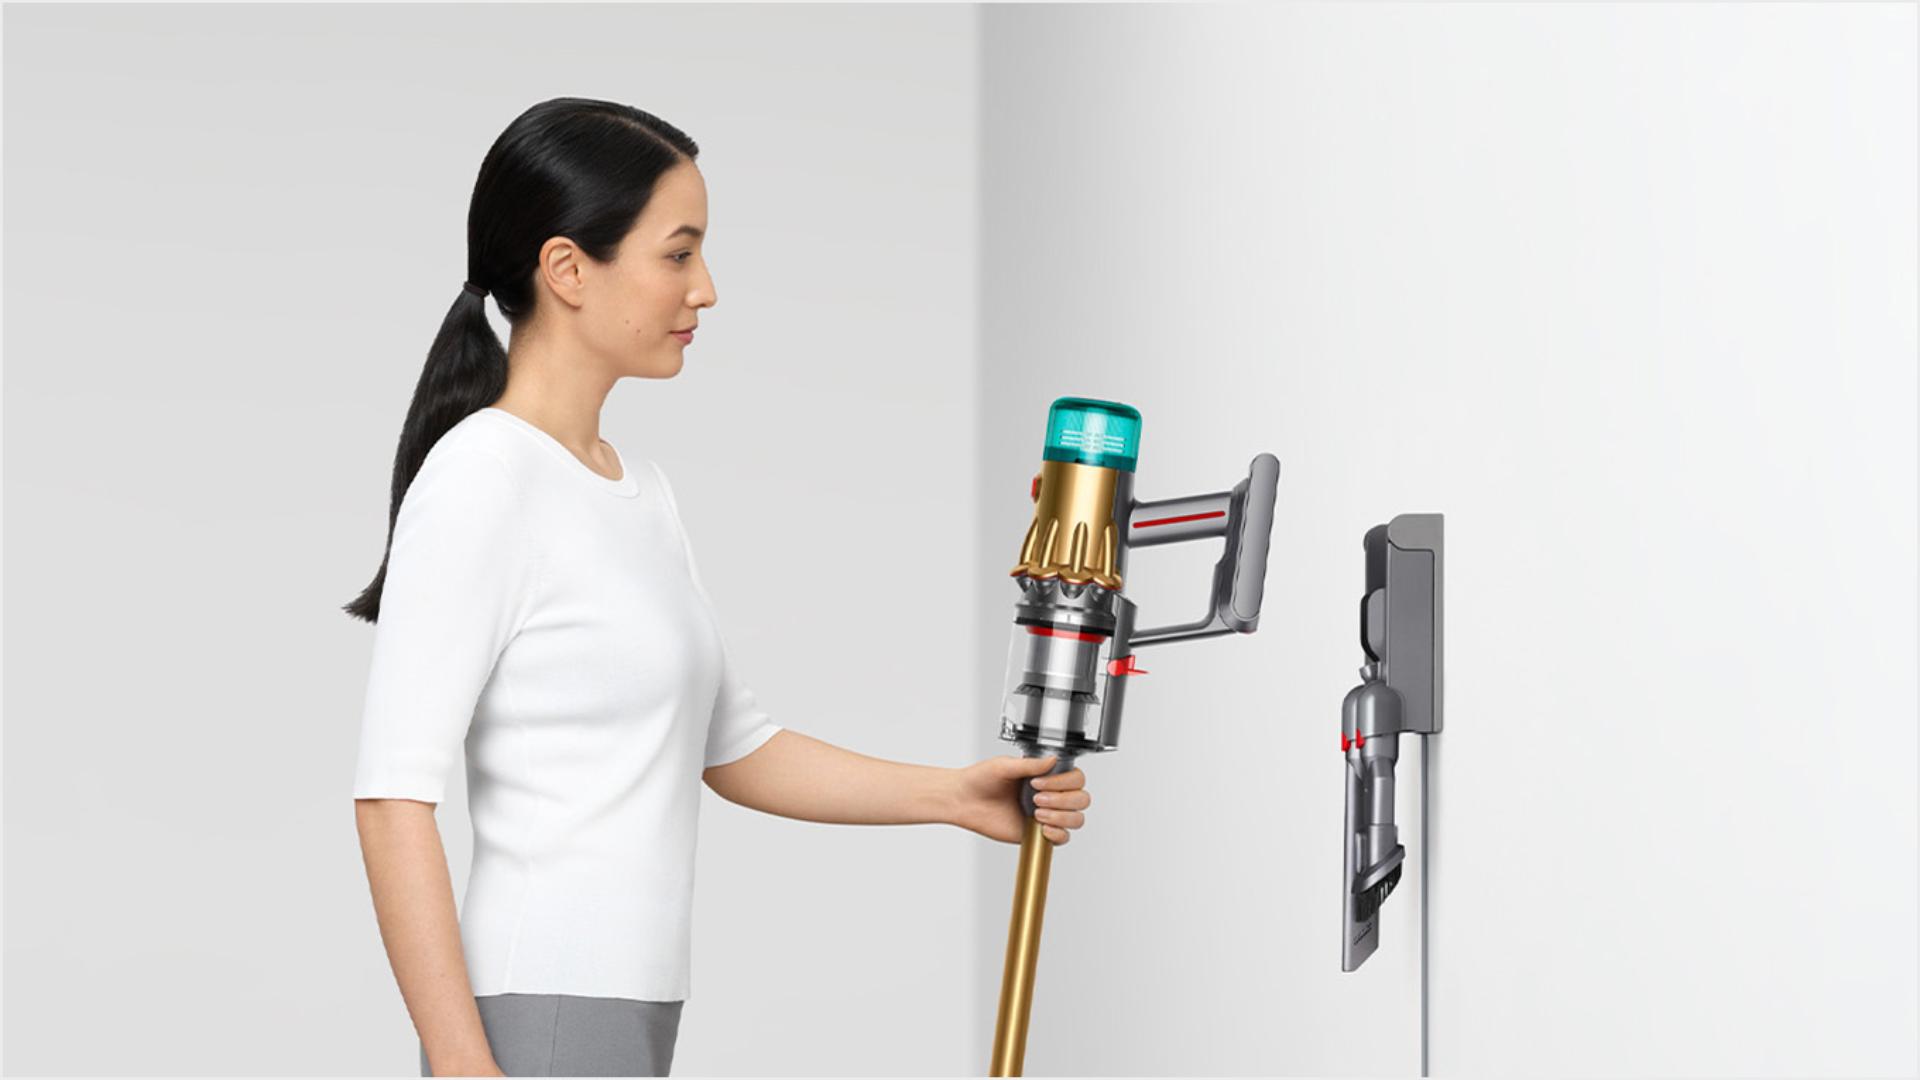 Woman dropping the vacuum into the wall-mounted charging dock.